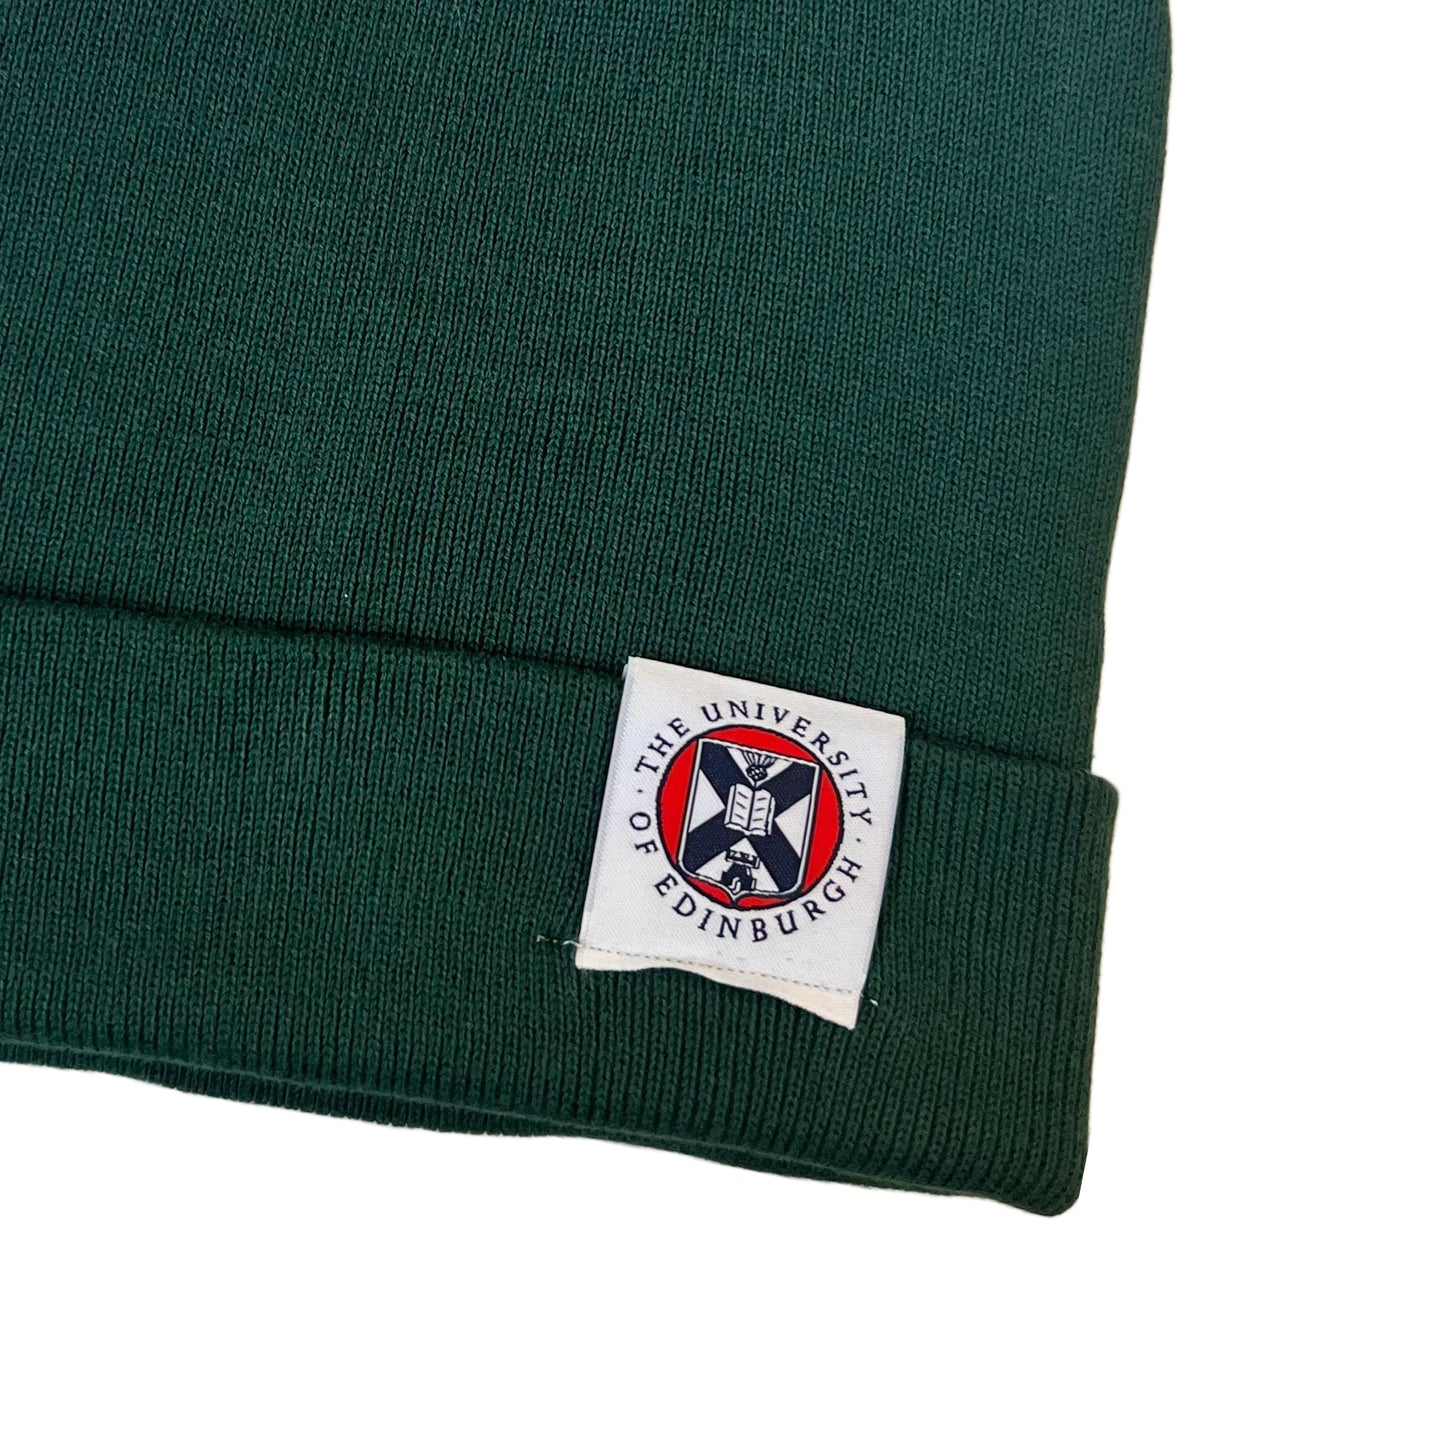 close up of bottle green rubbed beanie with woven label featuring University crest in red white and navy